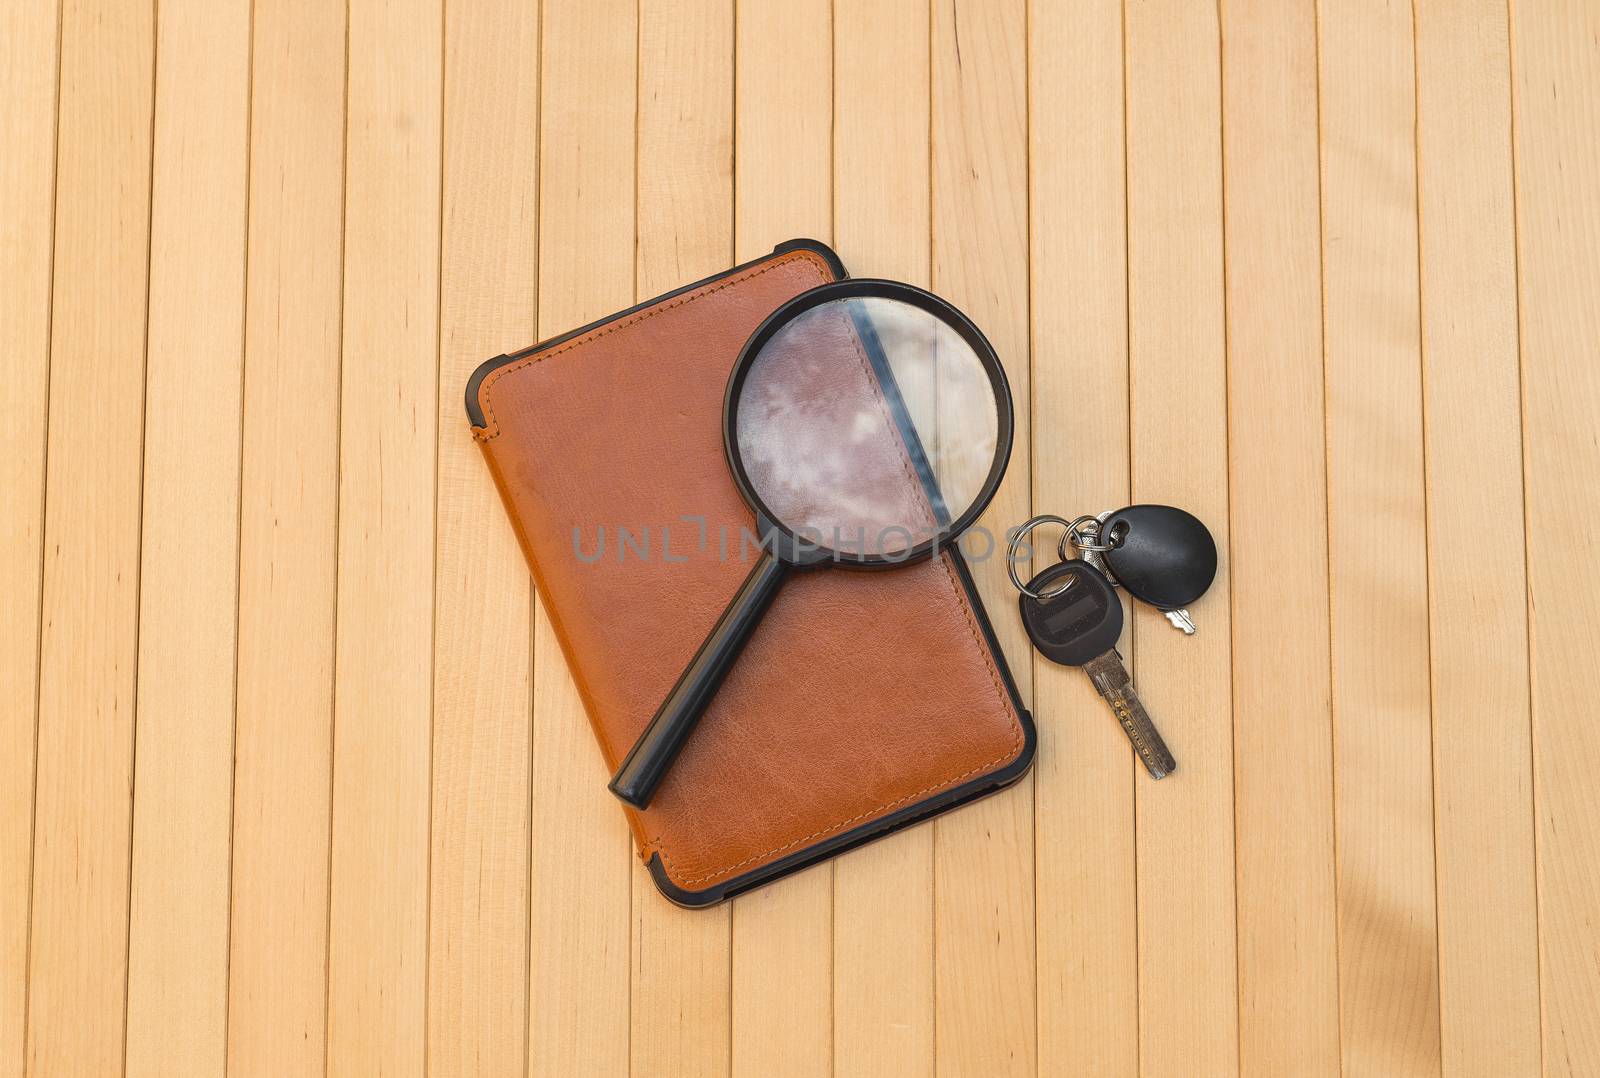 Magnifying glass e-book and keys on wooden background by boys1983@mail.ru